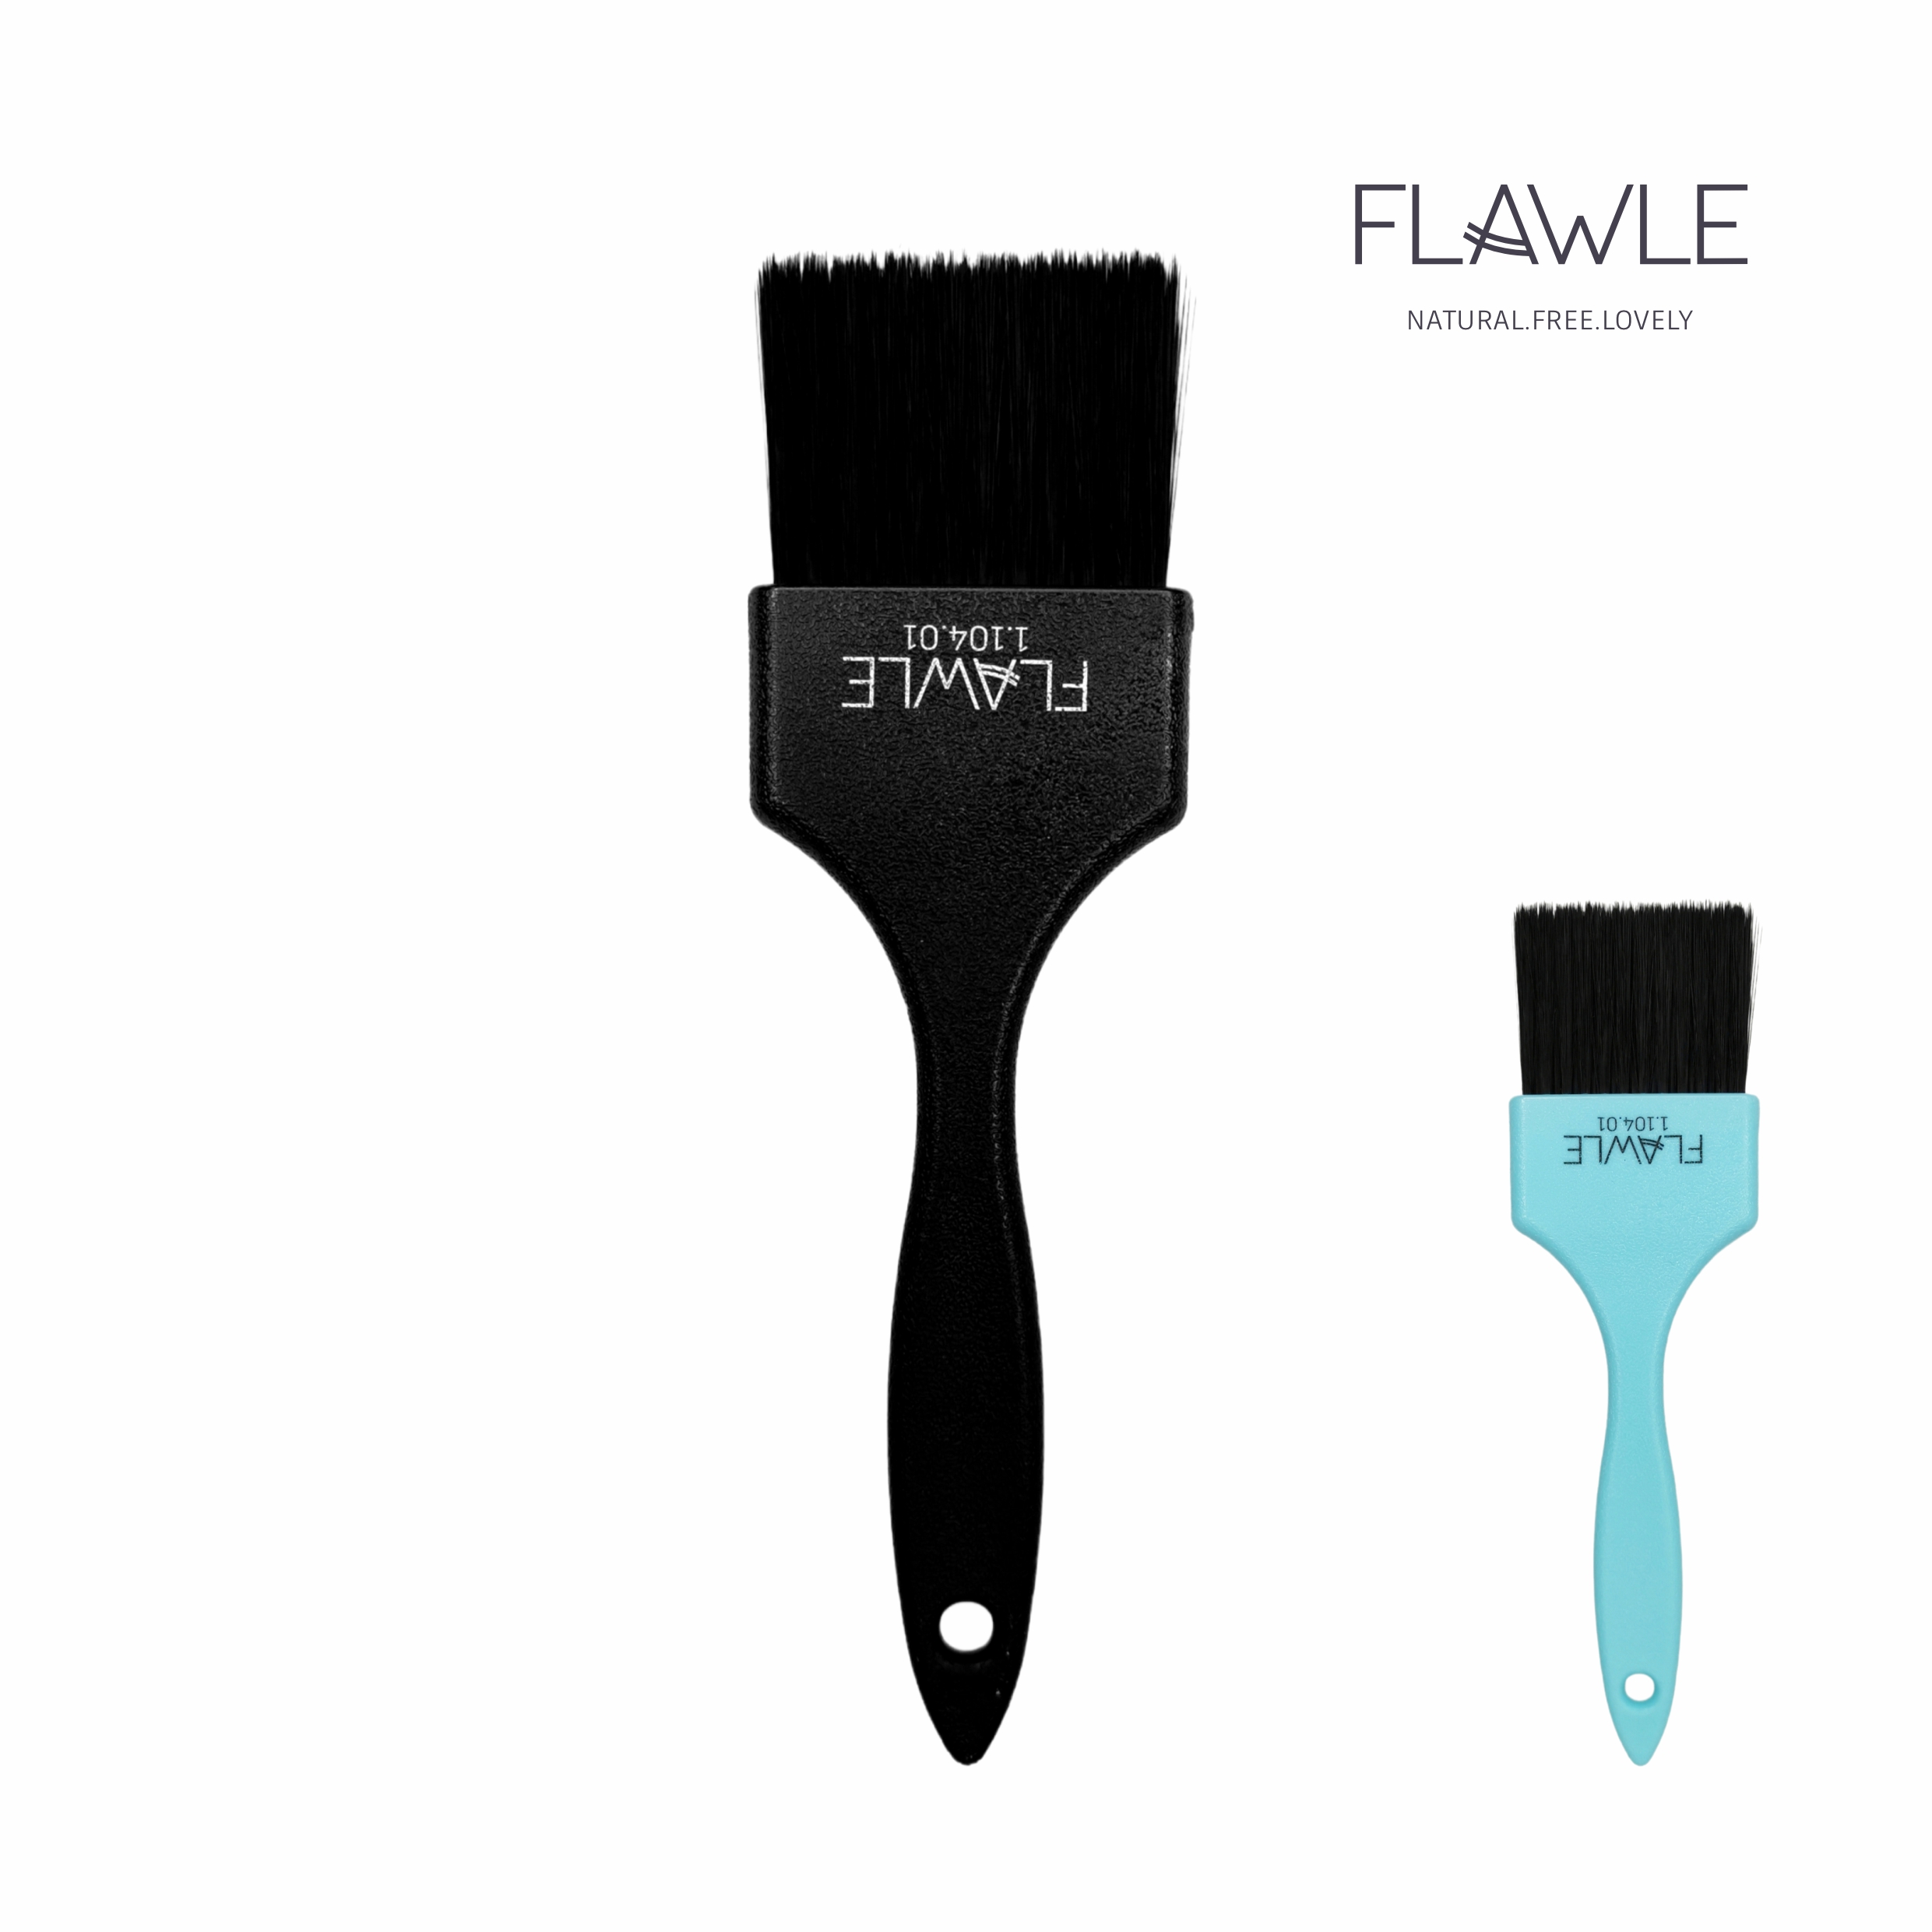 1.101.01 Flawle Painter Hair Color Brush